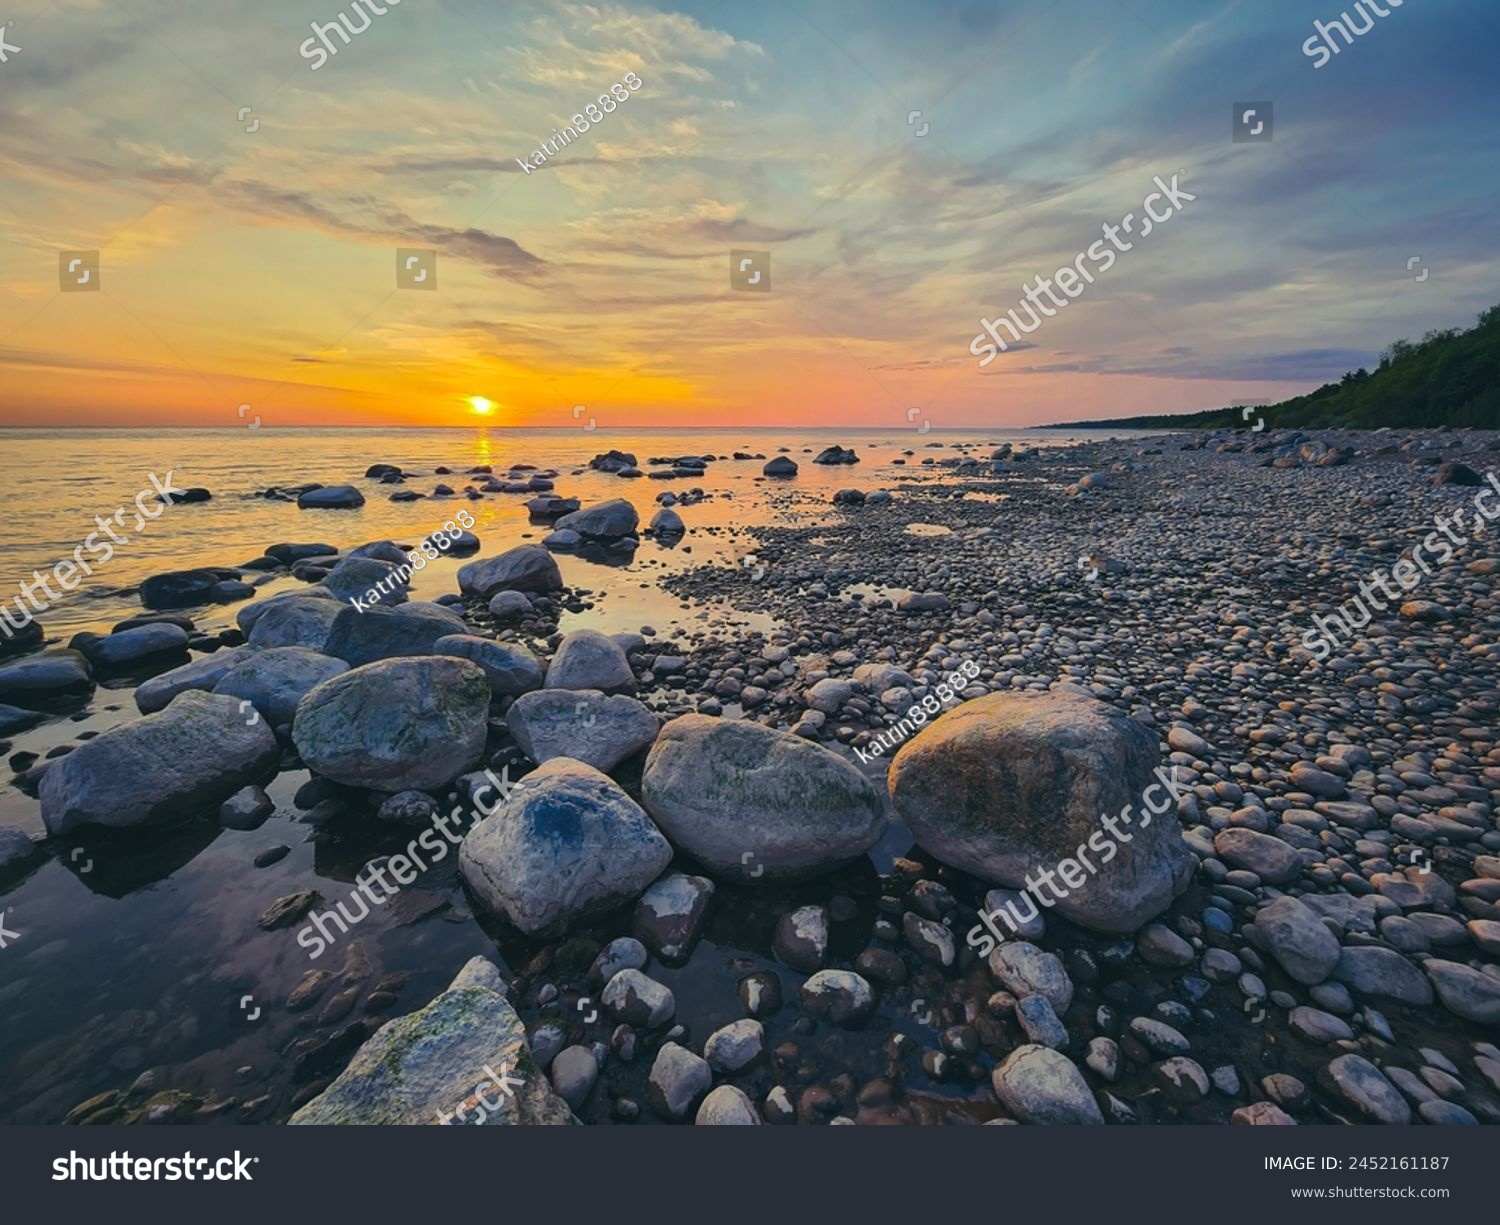 Sunset over serene lakeshore, with calm water reflecting the blue sky. Moss-covered rocks of varying sizes and shapes add texture, while the warm glow of the setting sun creates a tranquil atmosphere. #2452161187